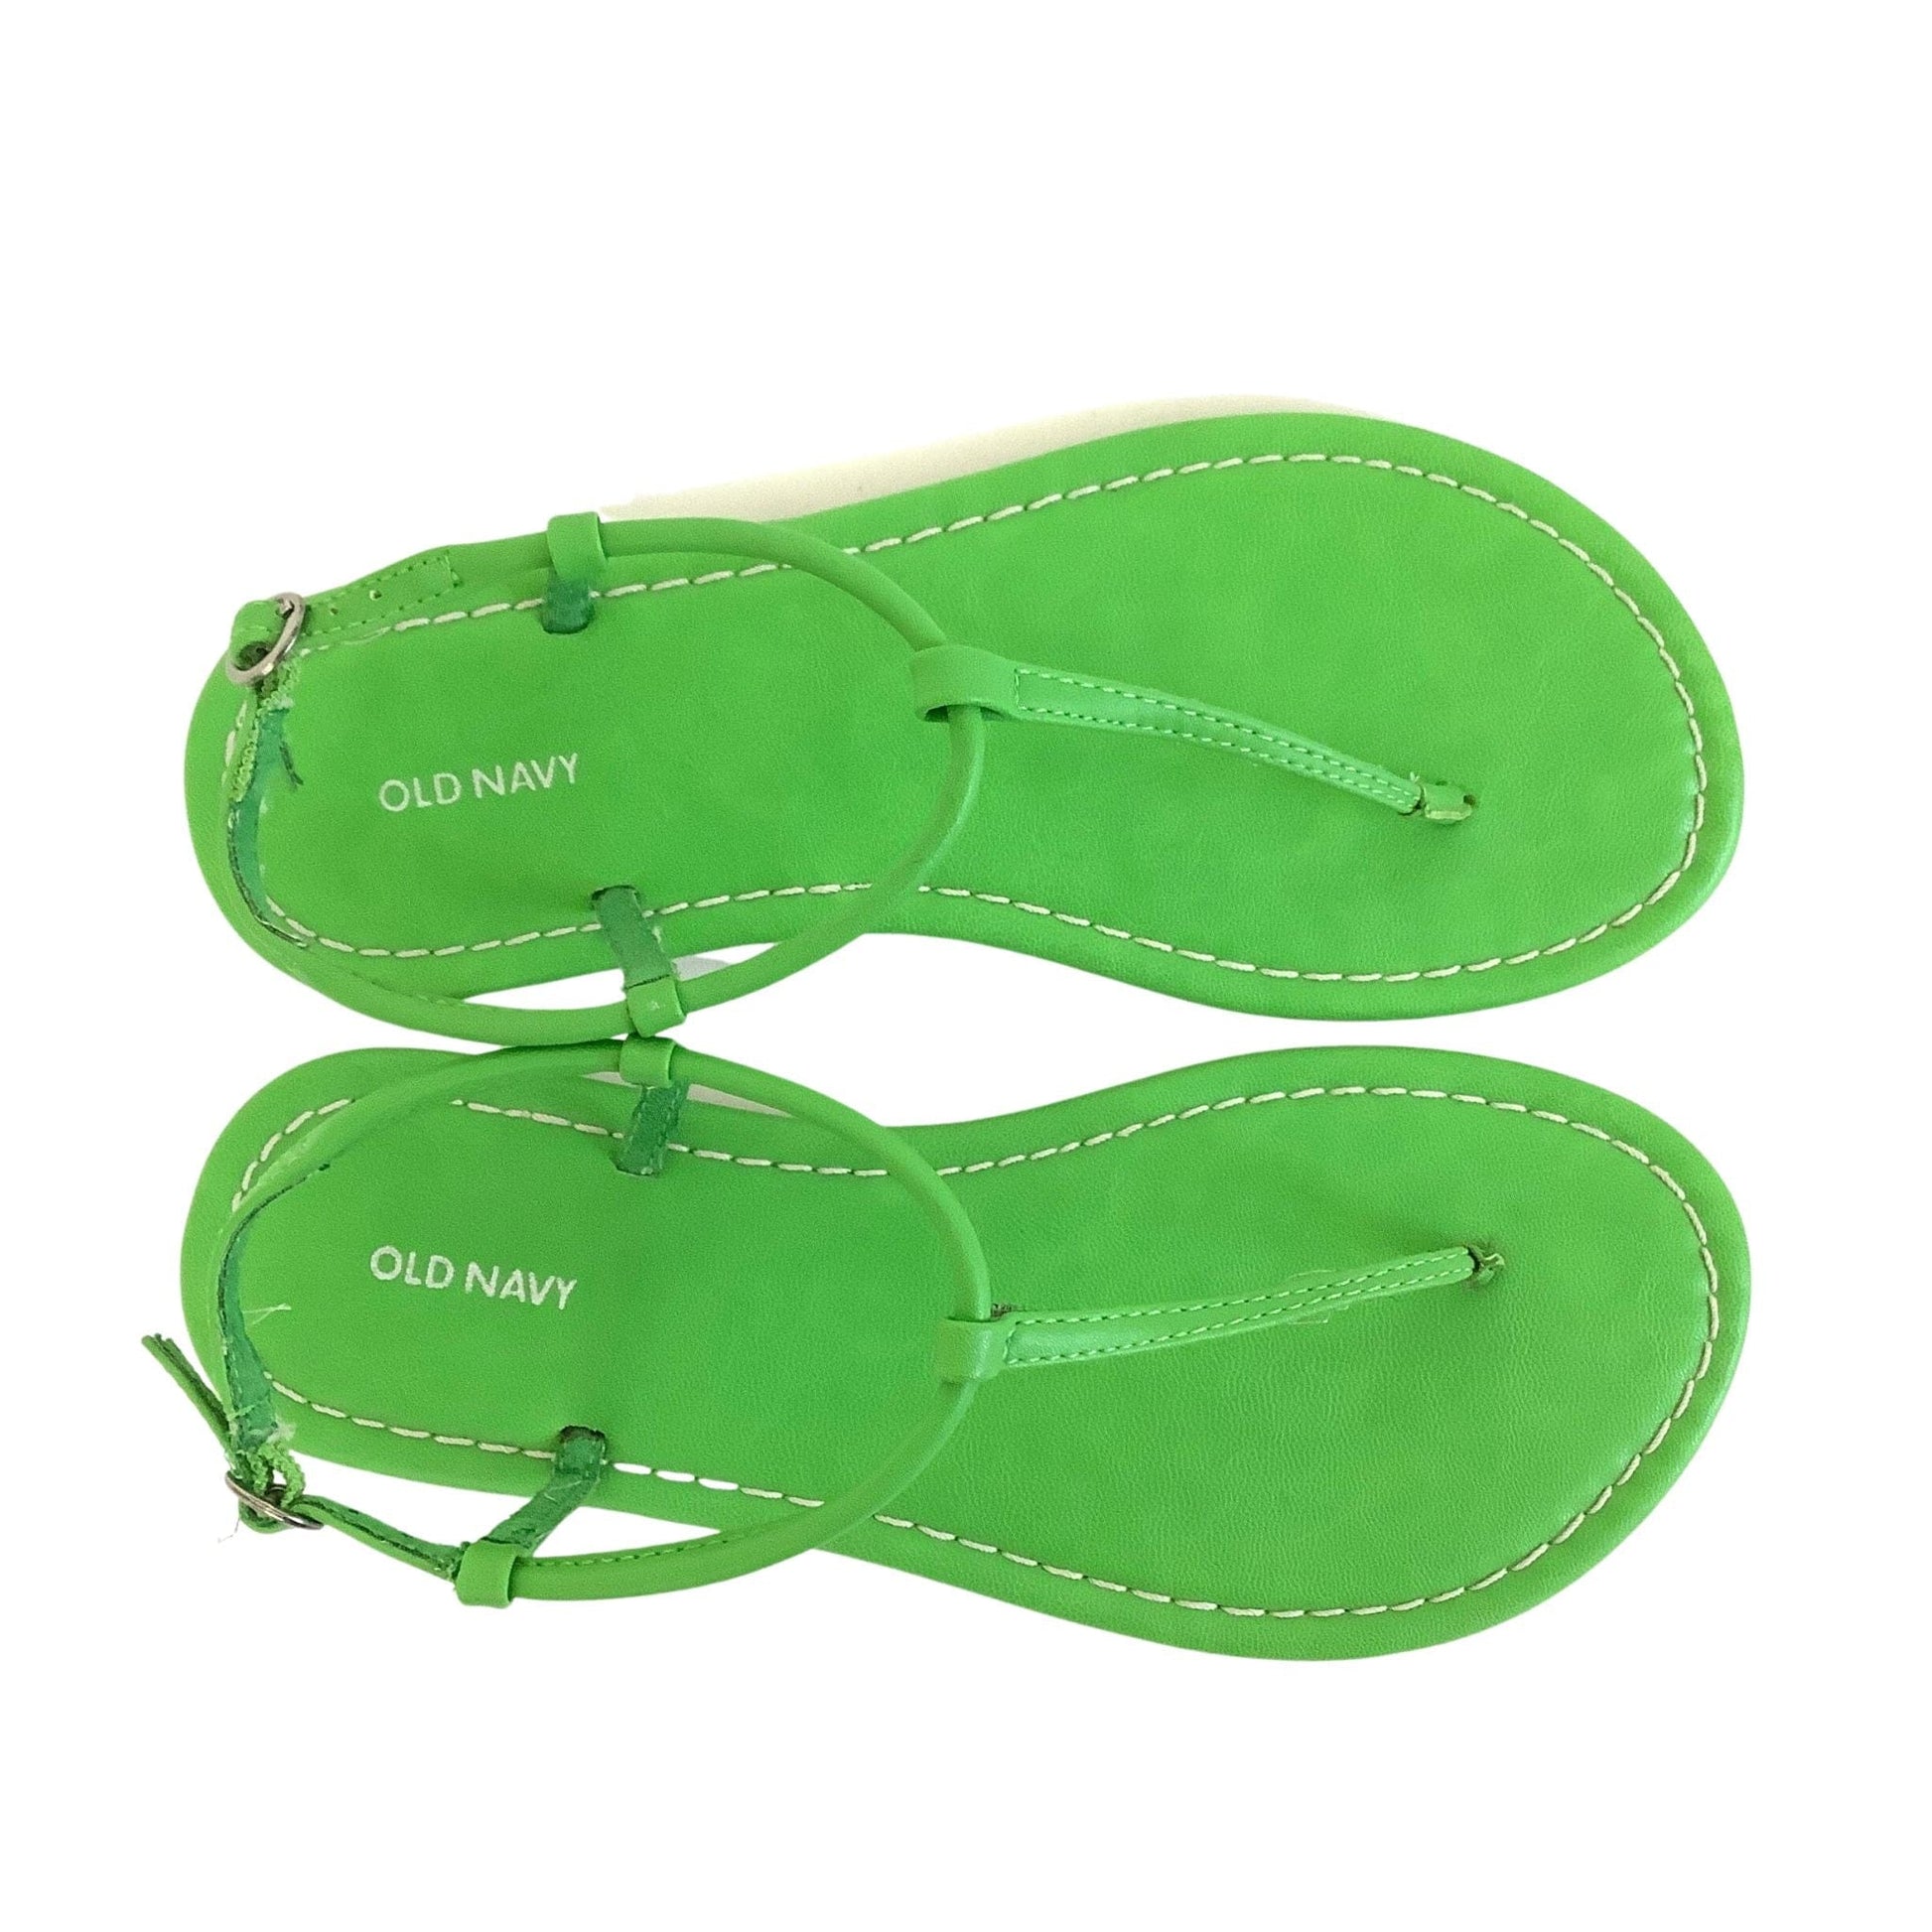 Old Navy Green Flat Sandals 7 / Green / Y2K - Now